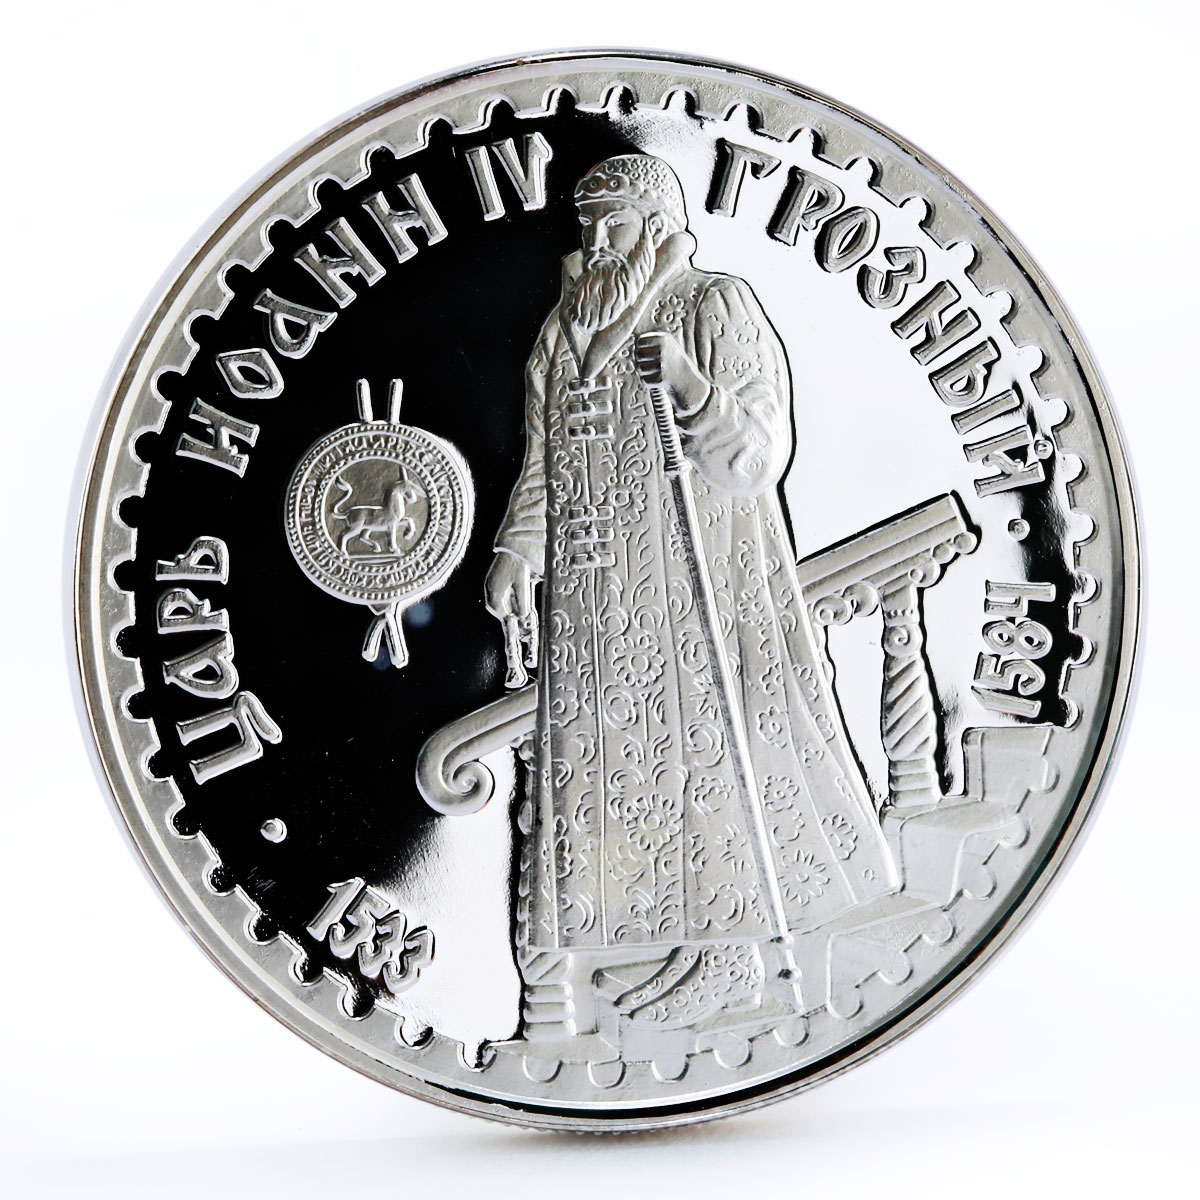 Russia Russian Tsars series Ioann the Fourth proof silver medal